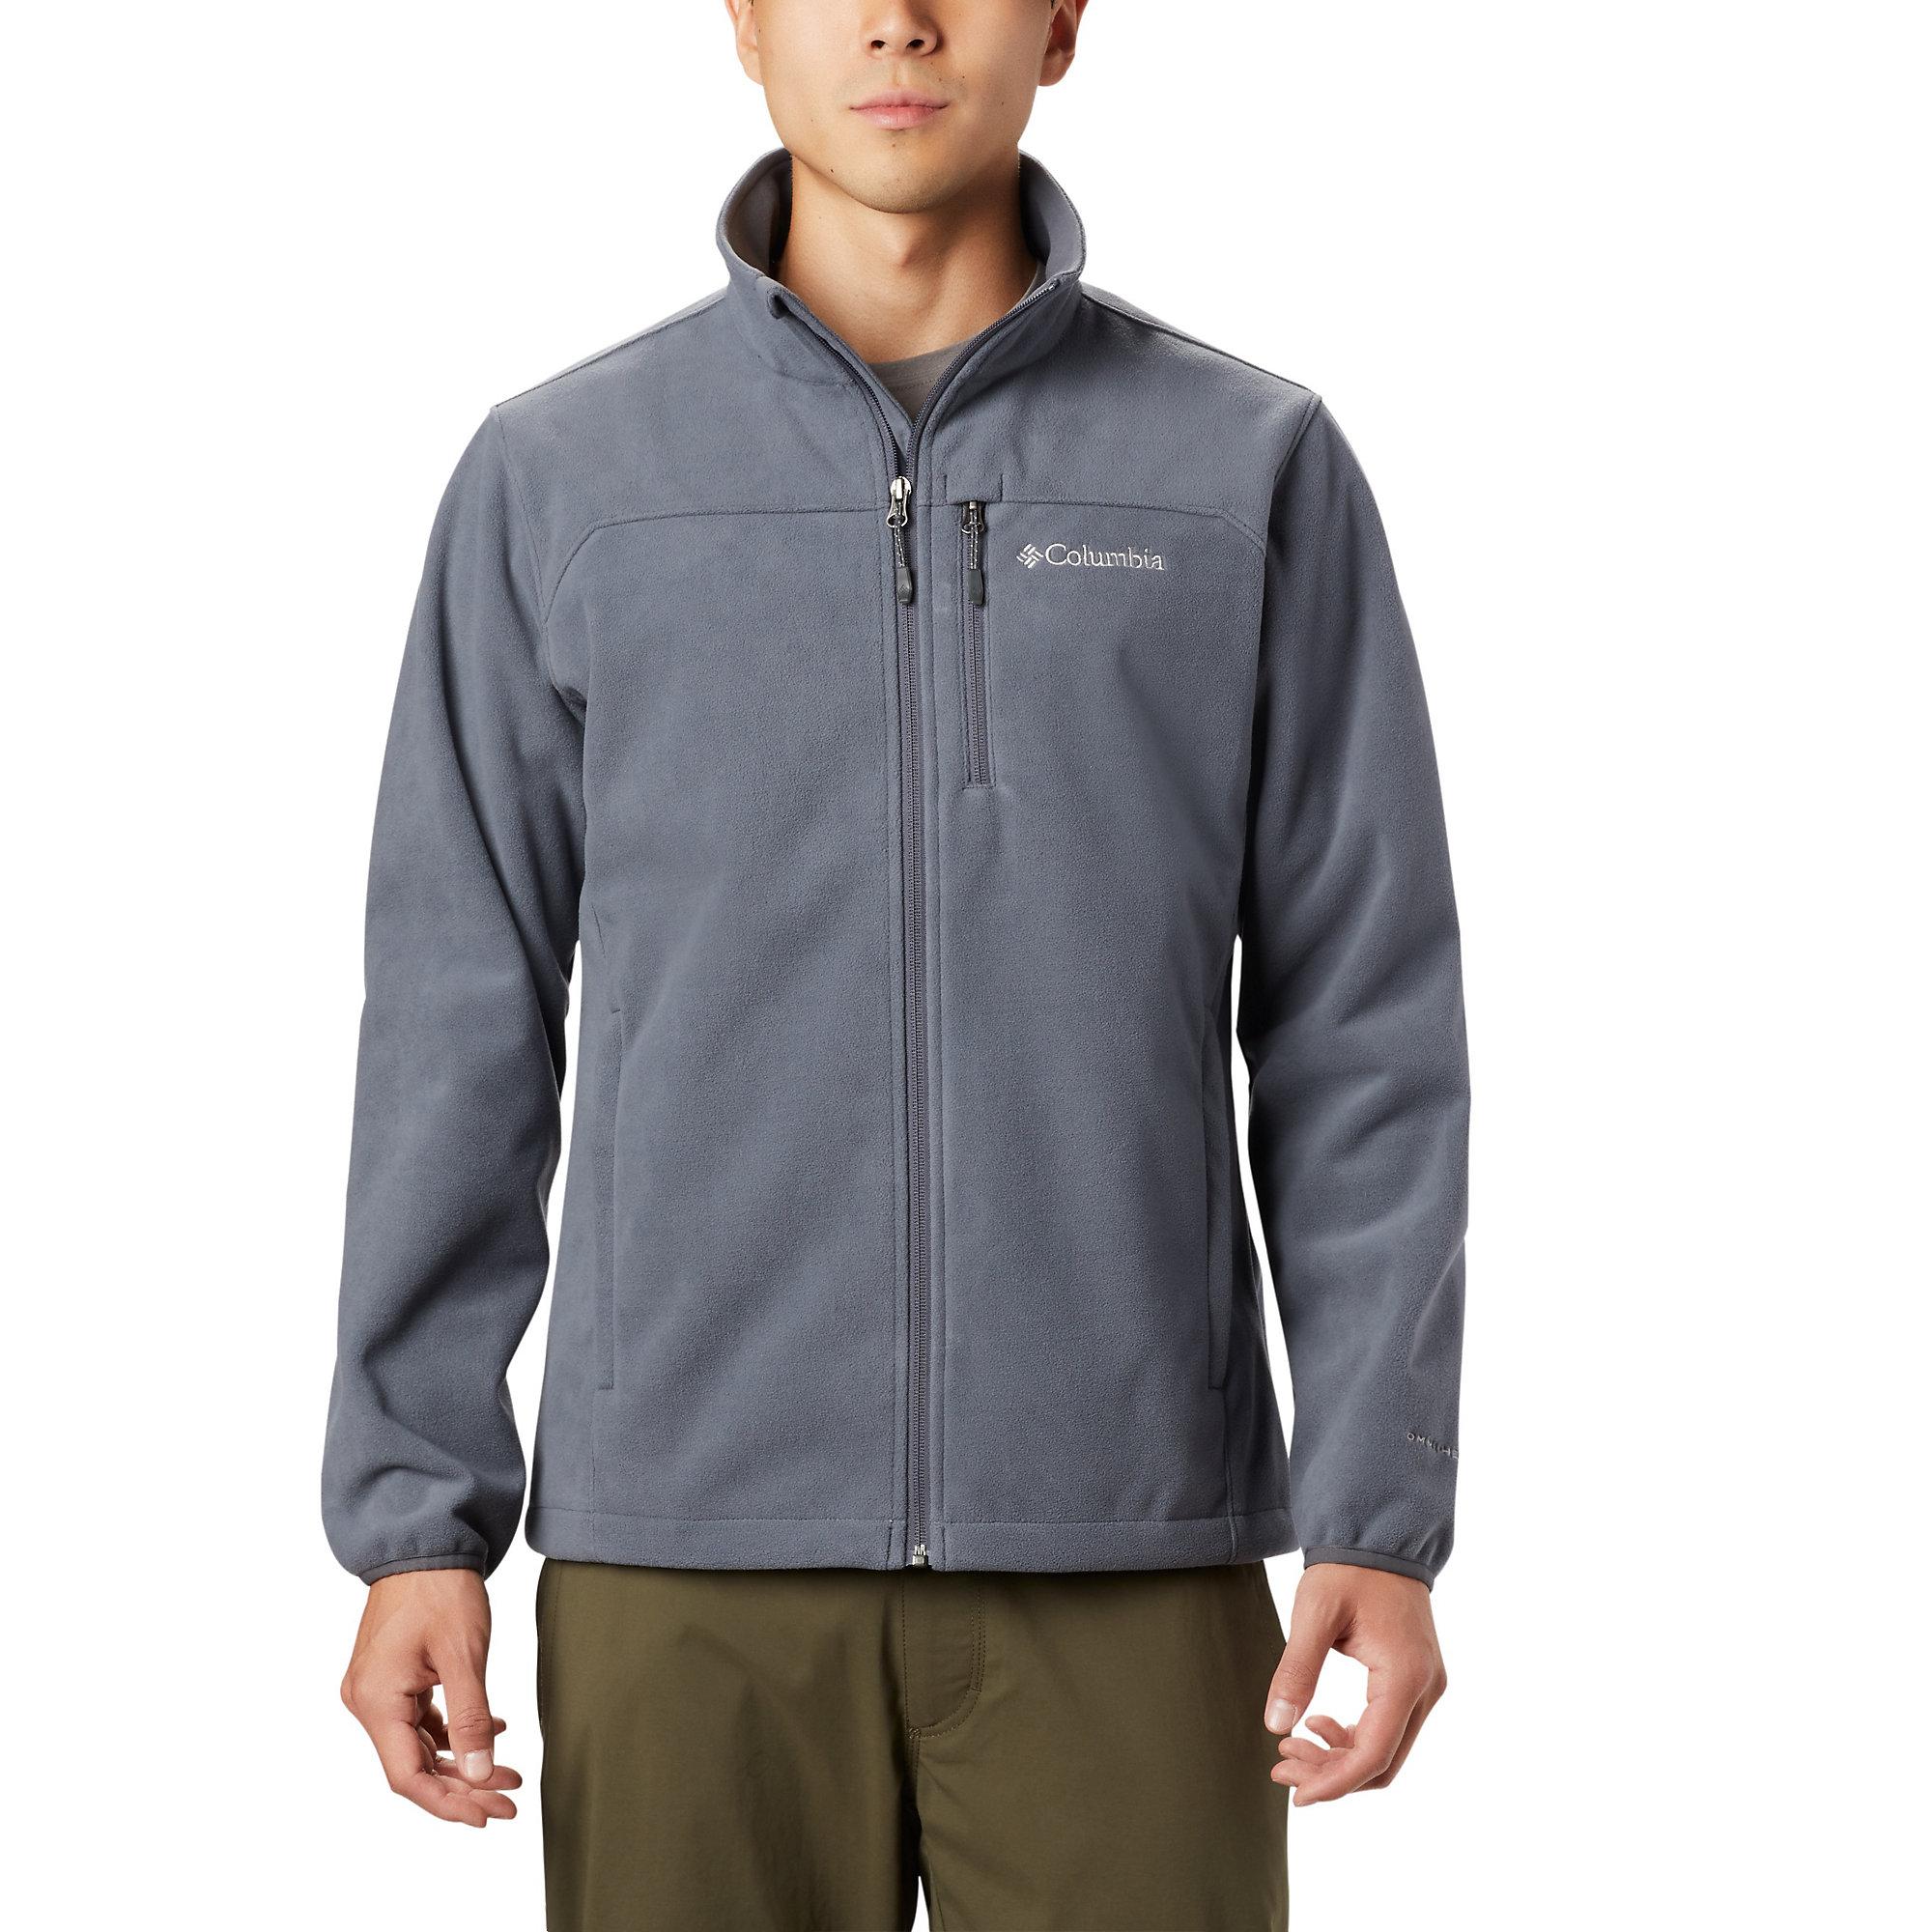 Columbia Synthetic Wind Protector in Graphite (Gray) for Men - Lyst